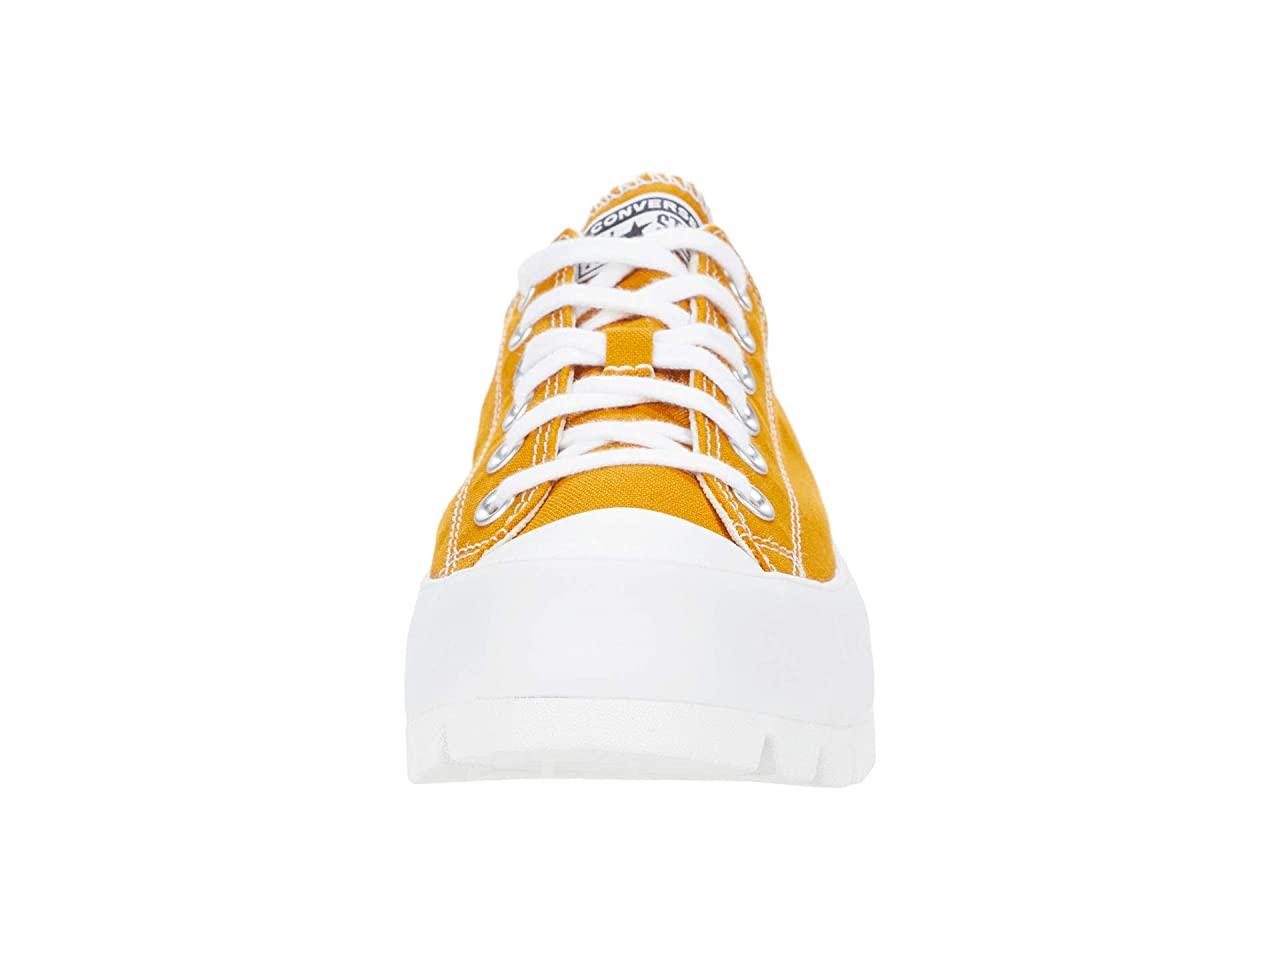 converse all star 7 yellow